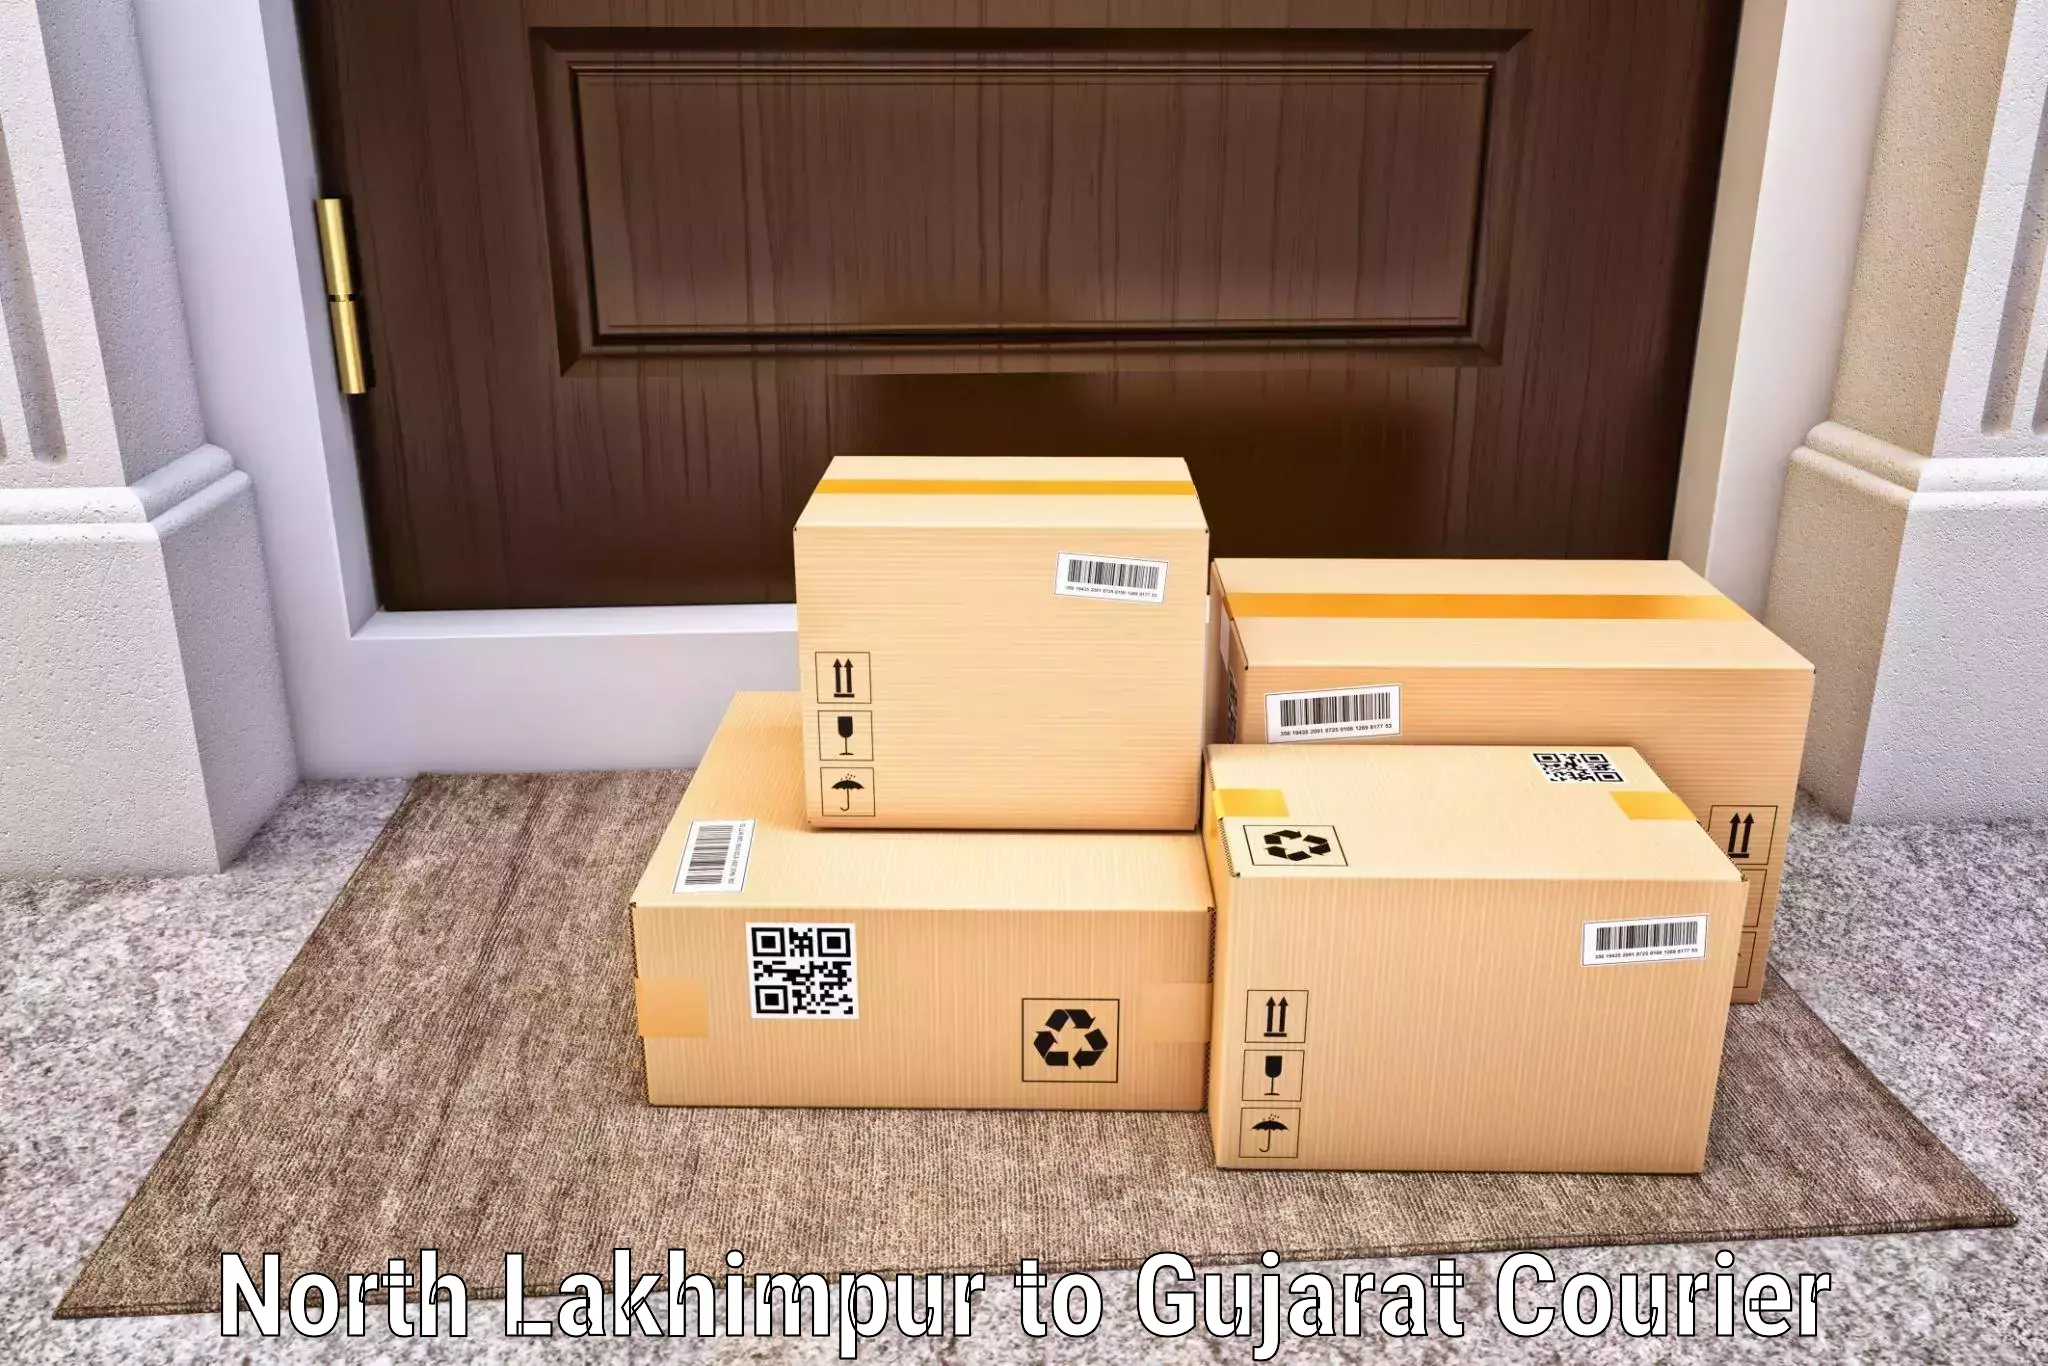 Reliable delivery network North Lakhimpur to Gujarat